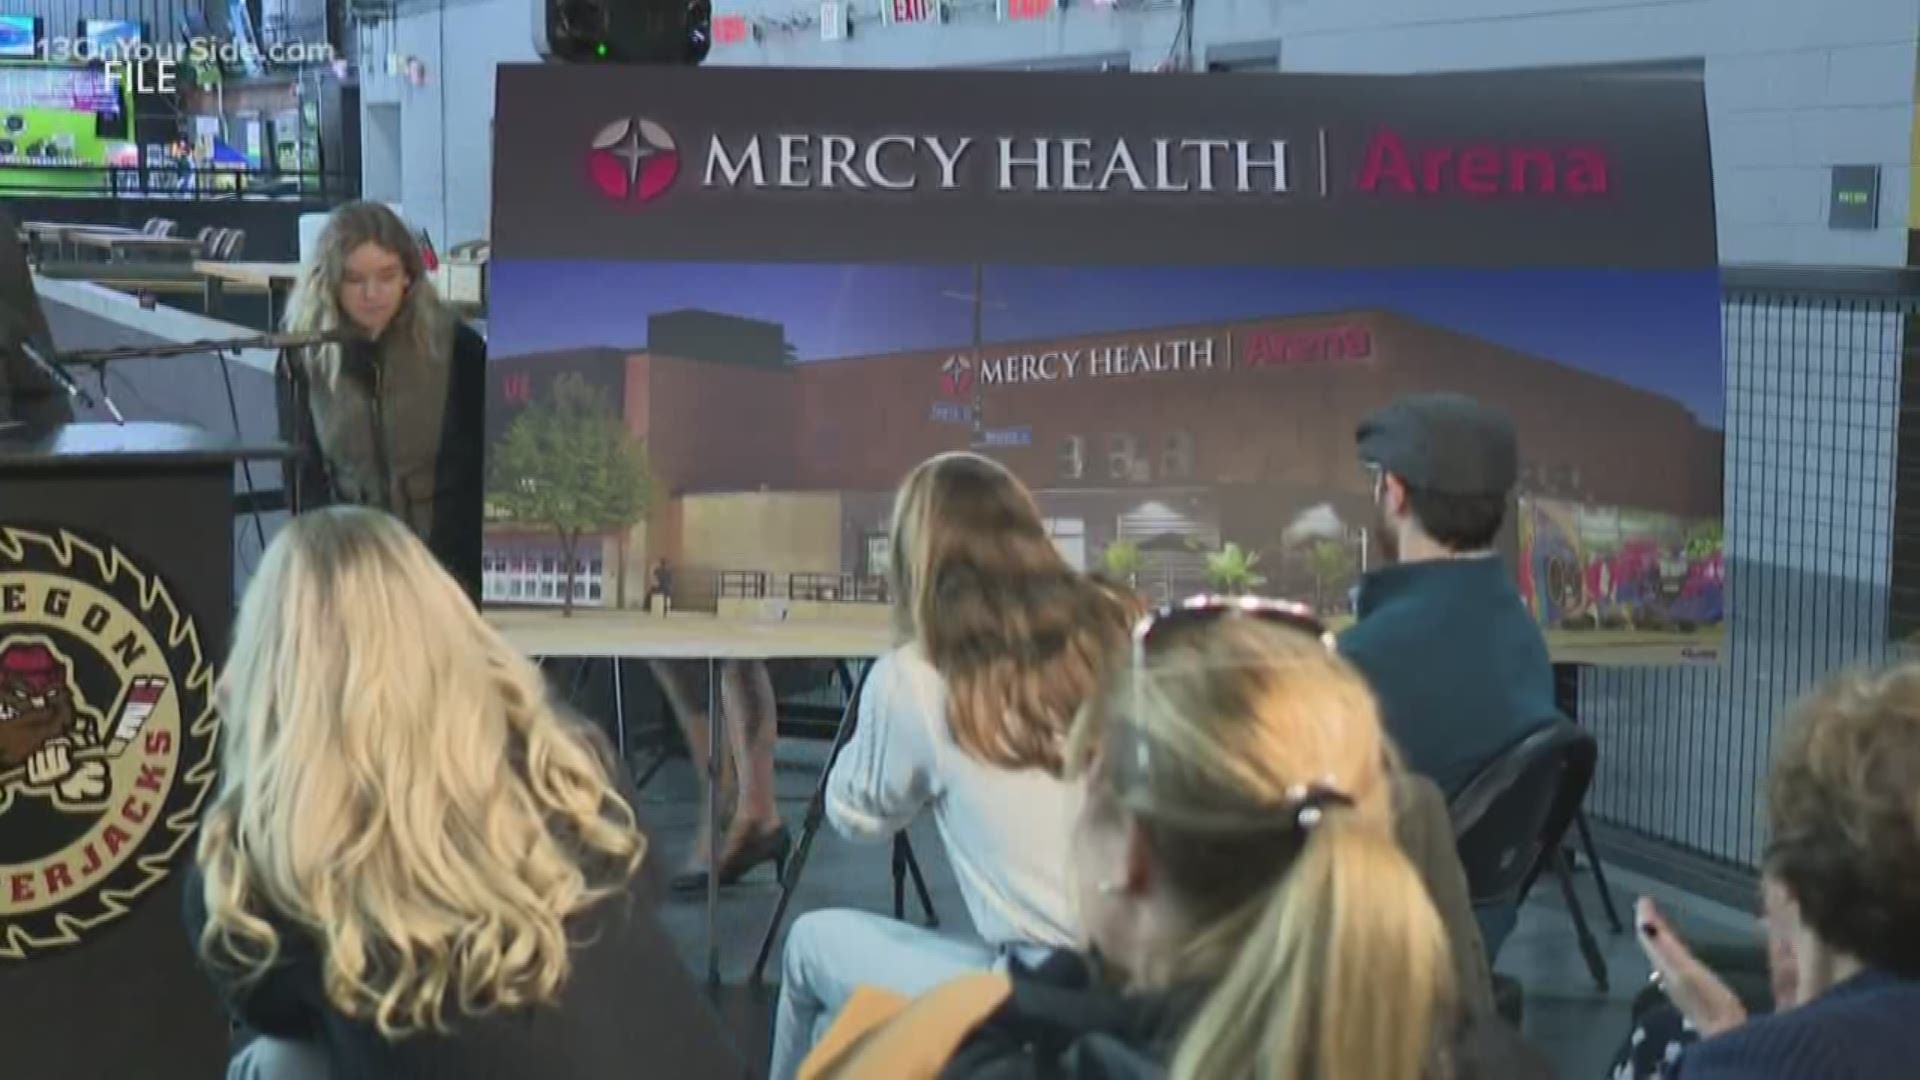 Muskegon City Manager Frank Peterson will provide an informational presentation on the agreement with Mercy Health at the city commission meeting Tuesday.